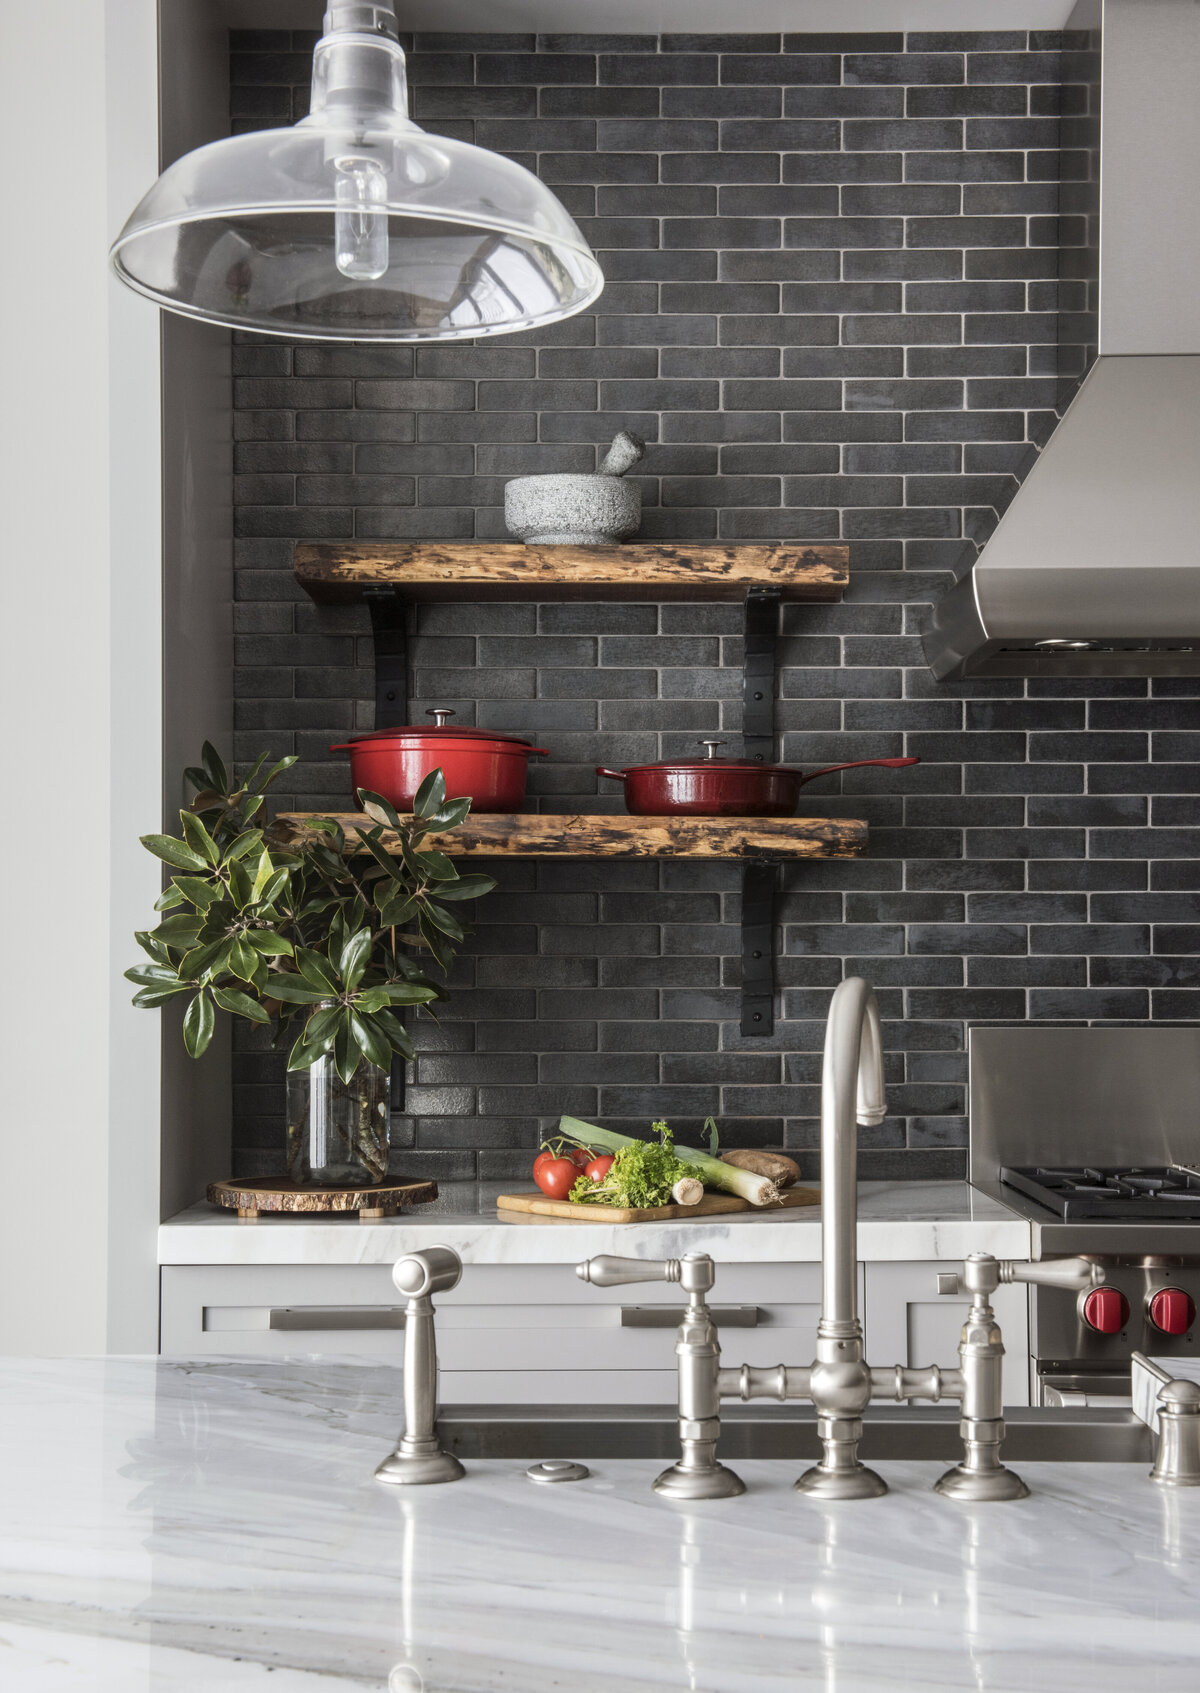 Classic Design kitchen faucet with brick wall tiles and wall shelves